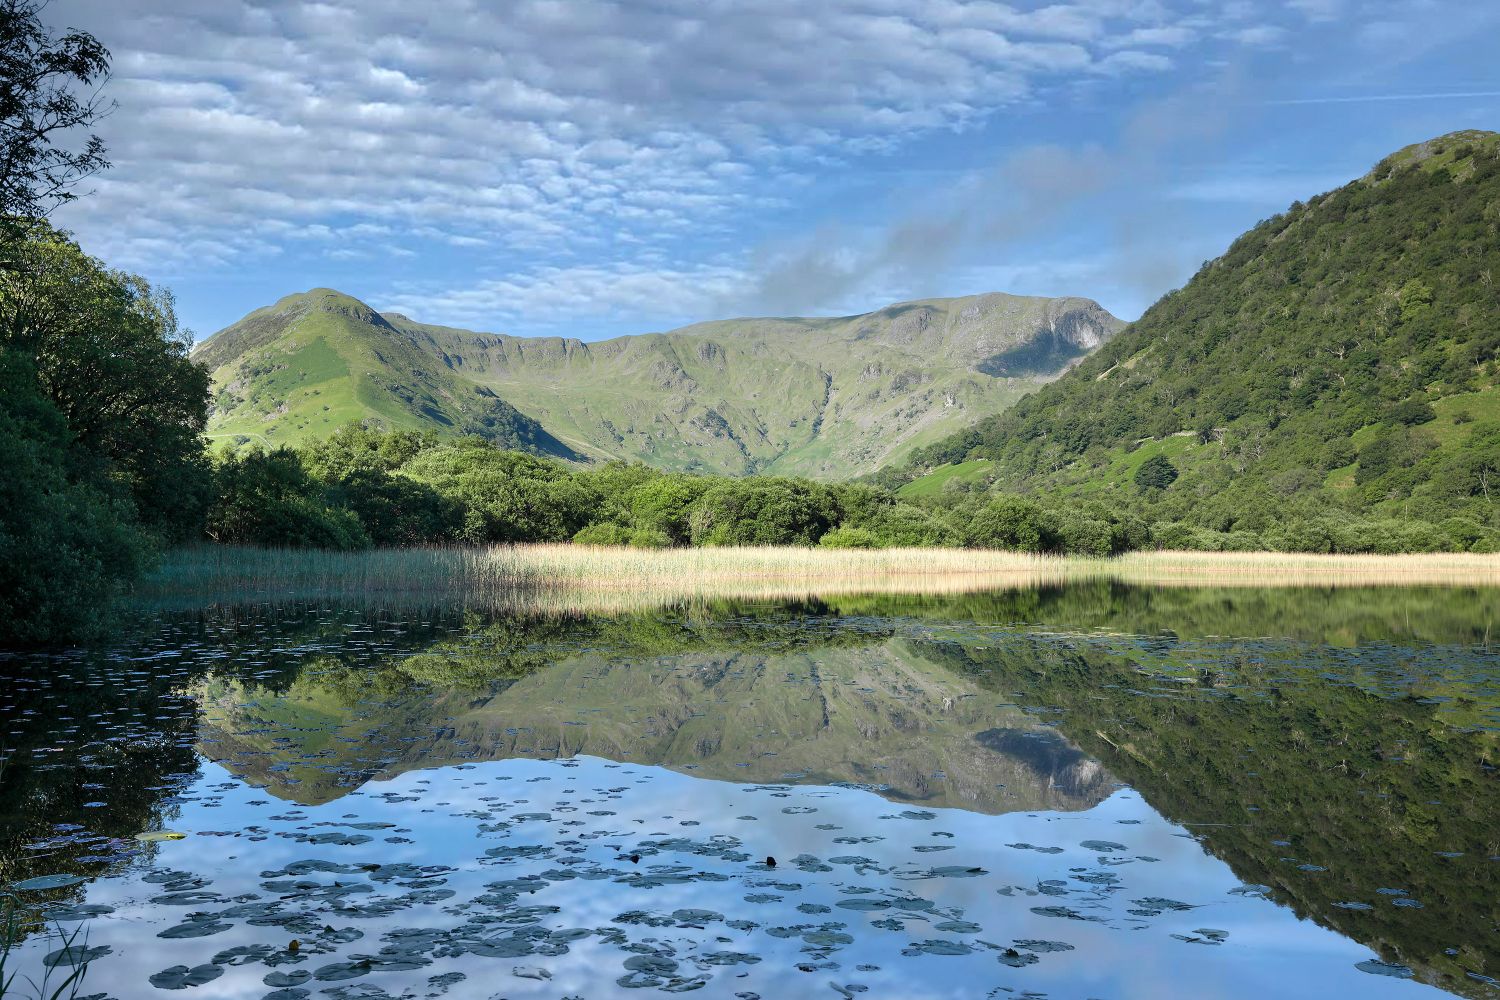 Brothers Water and High Hartsop Dodd by Martin Lawrence